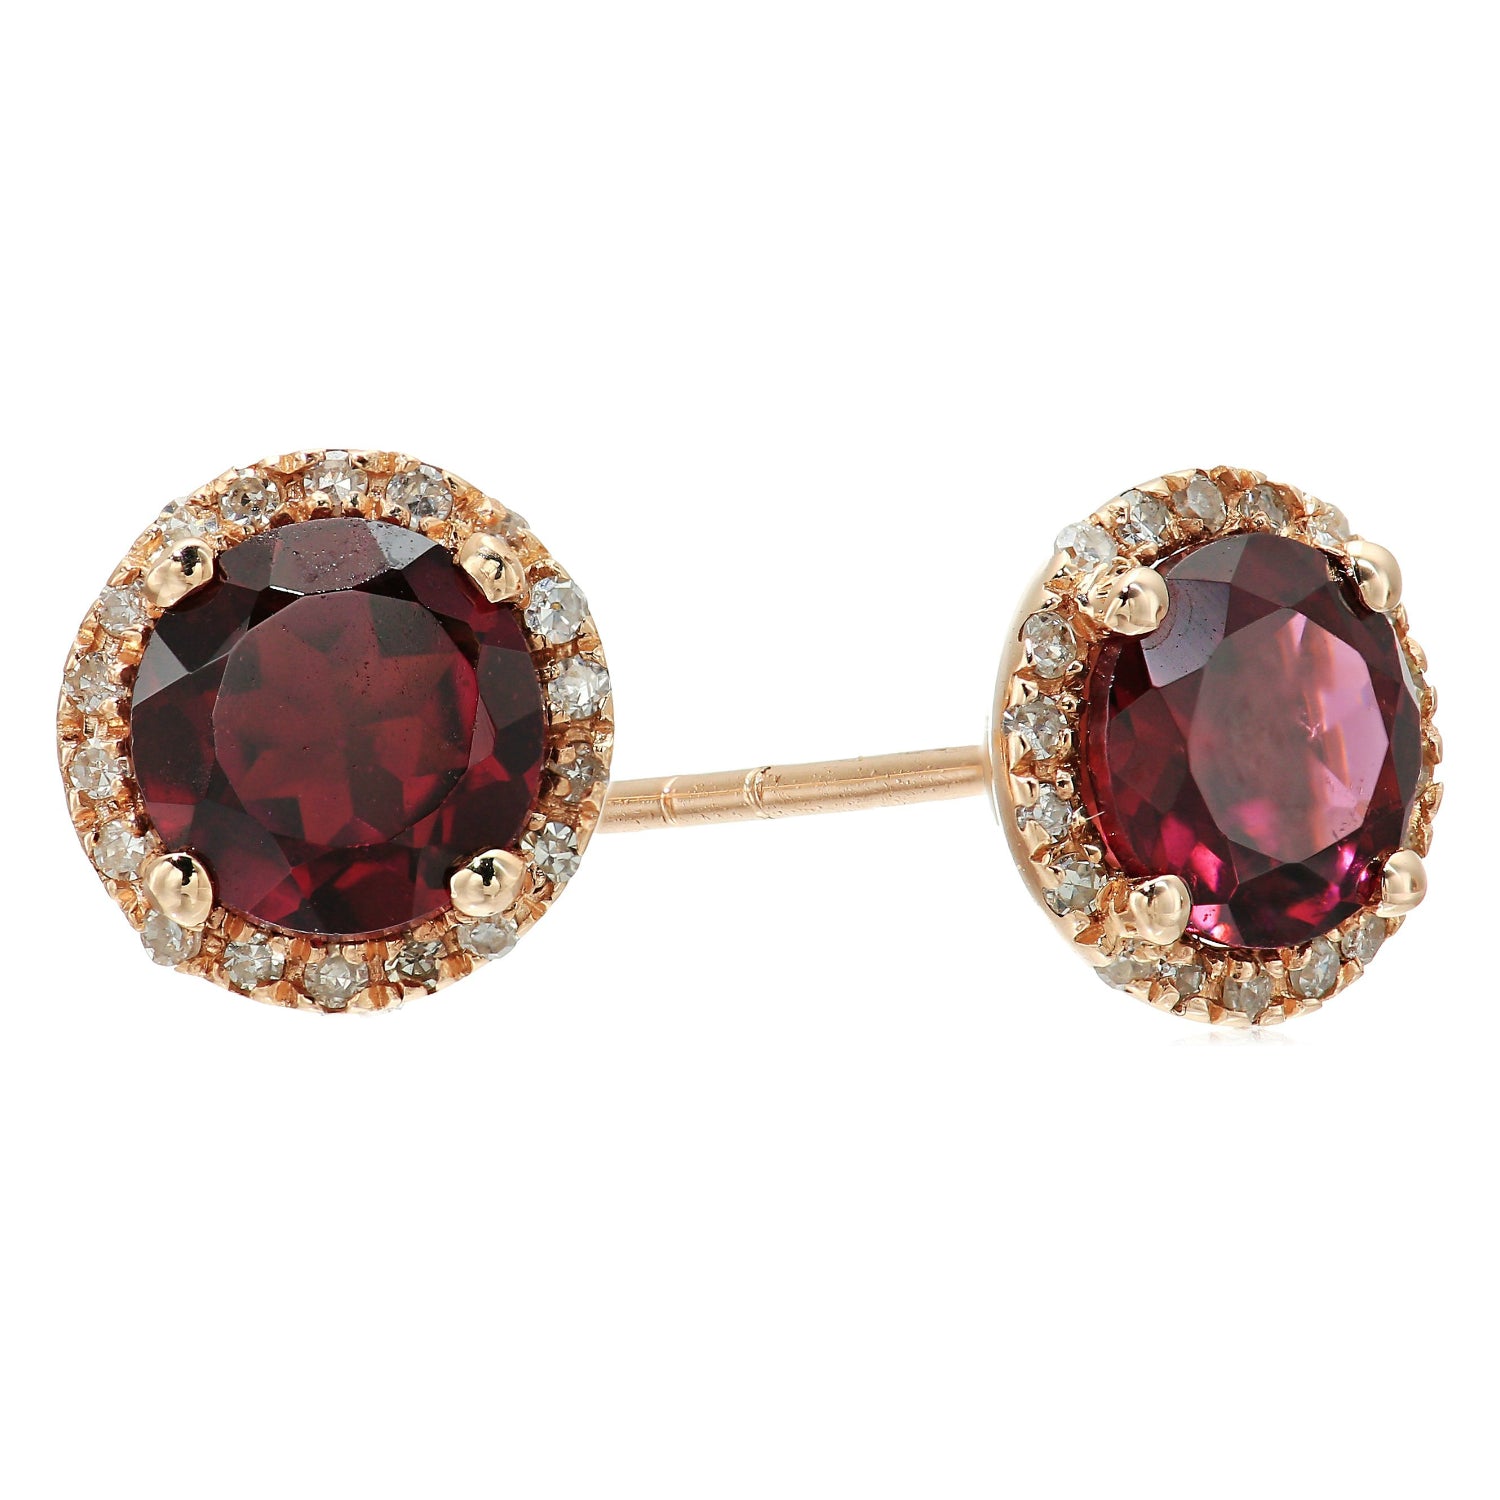 Pinctore 10k Rose Gold Rhodolite and Diamond Classic Princess Di Halo Stud Earrings (1/6 cttw, H-I Color, I1-I2 Clarity)